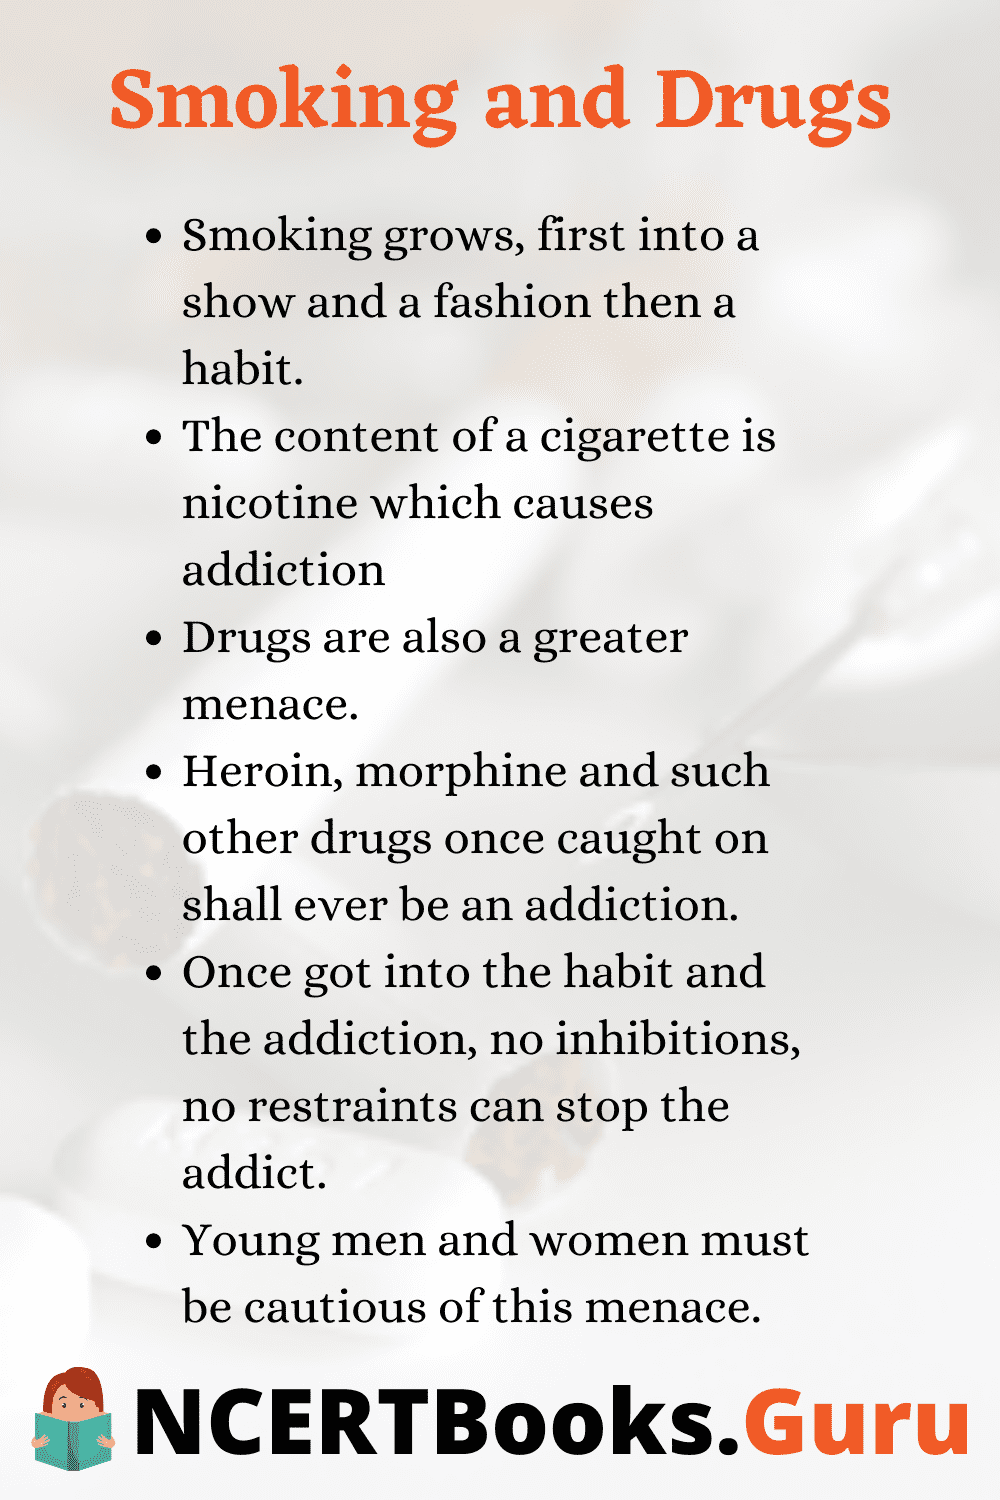 short essay about smoking effects